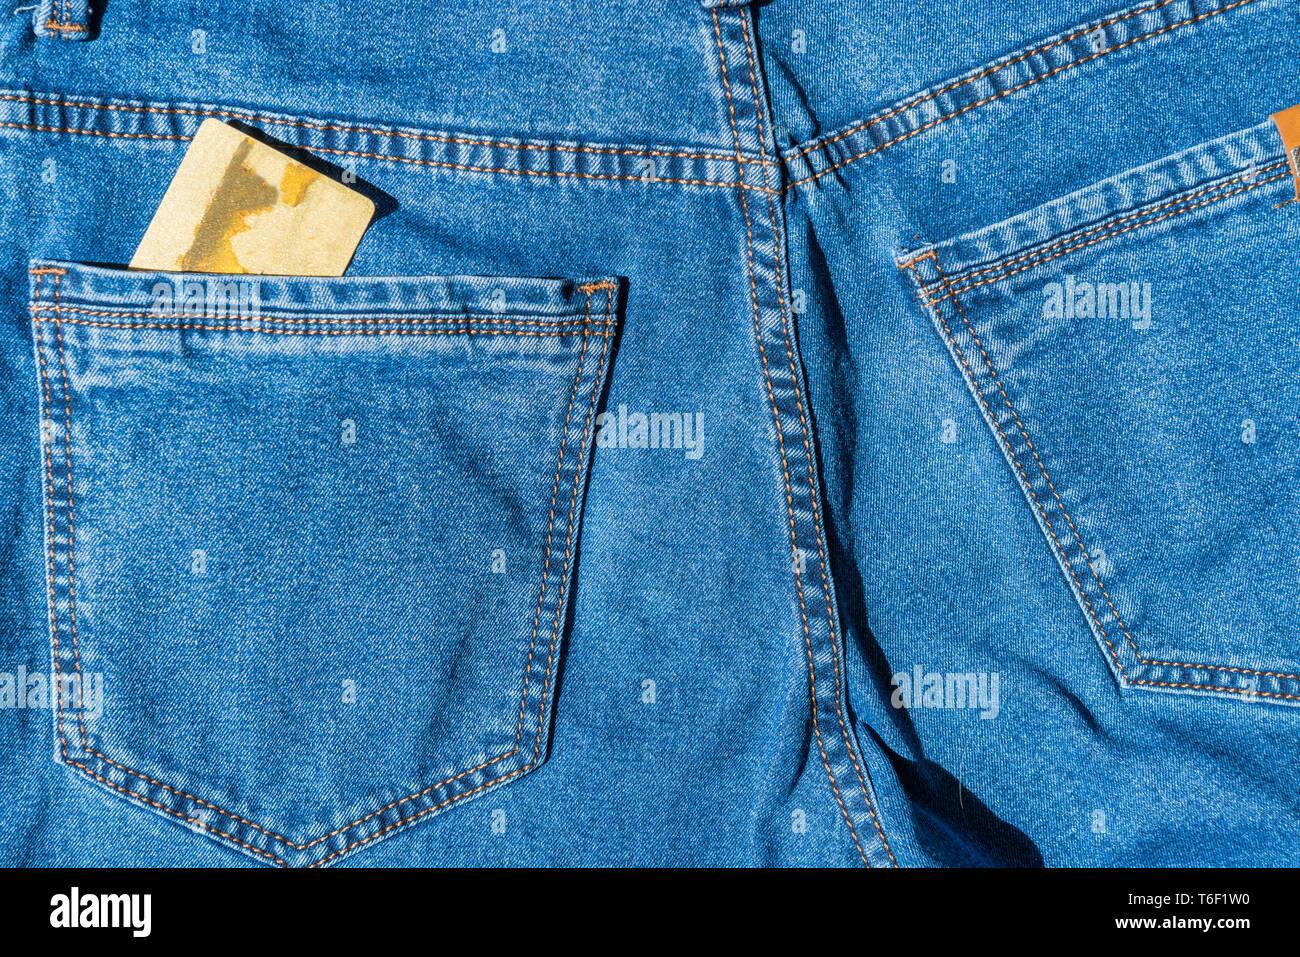 Credit plastic bank card in blue jeans pocket Stock Photo - Alamy